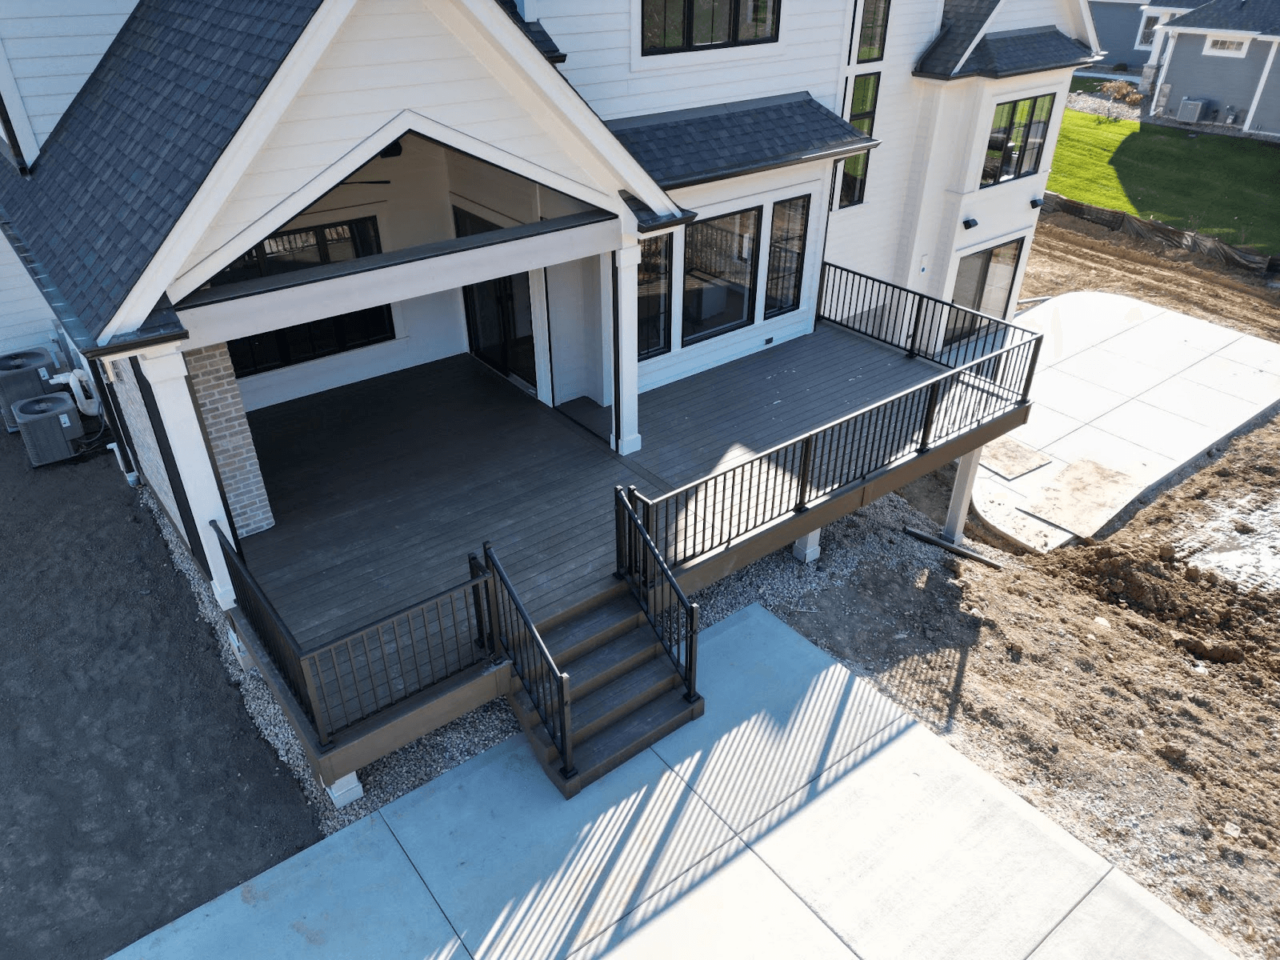 Considerations for Covered Porch - Custom Covered Porch builder and contractor Washington County, WI